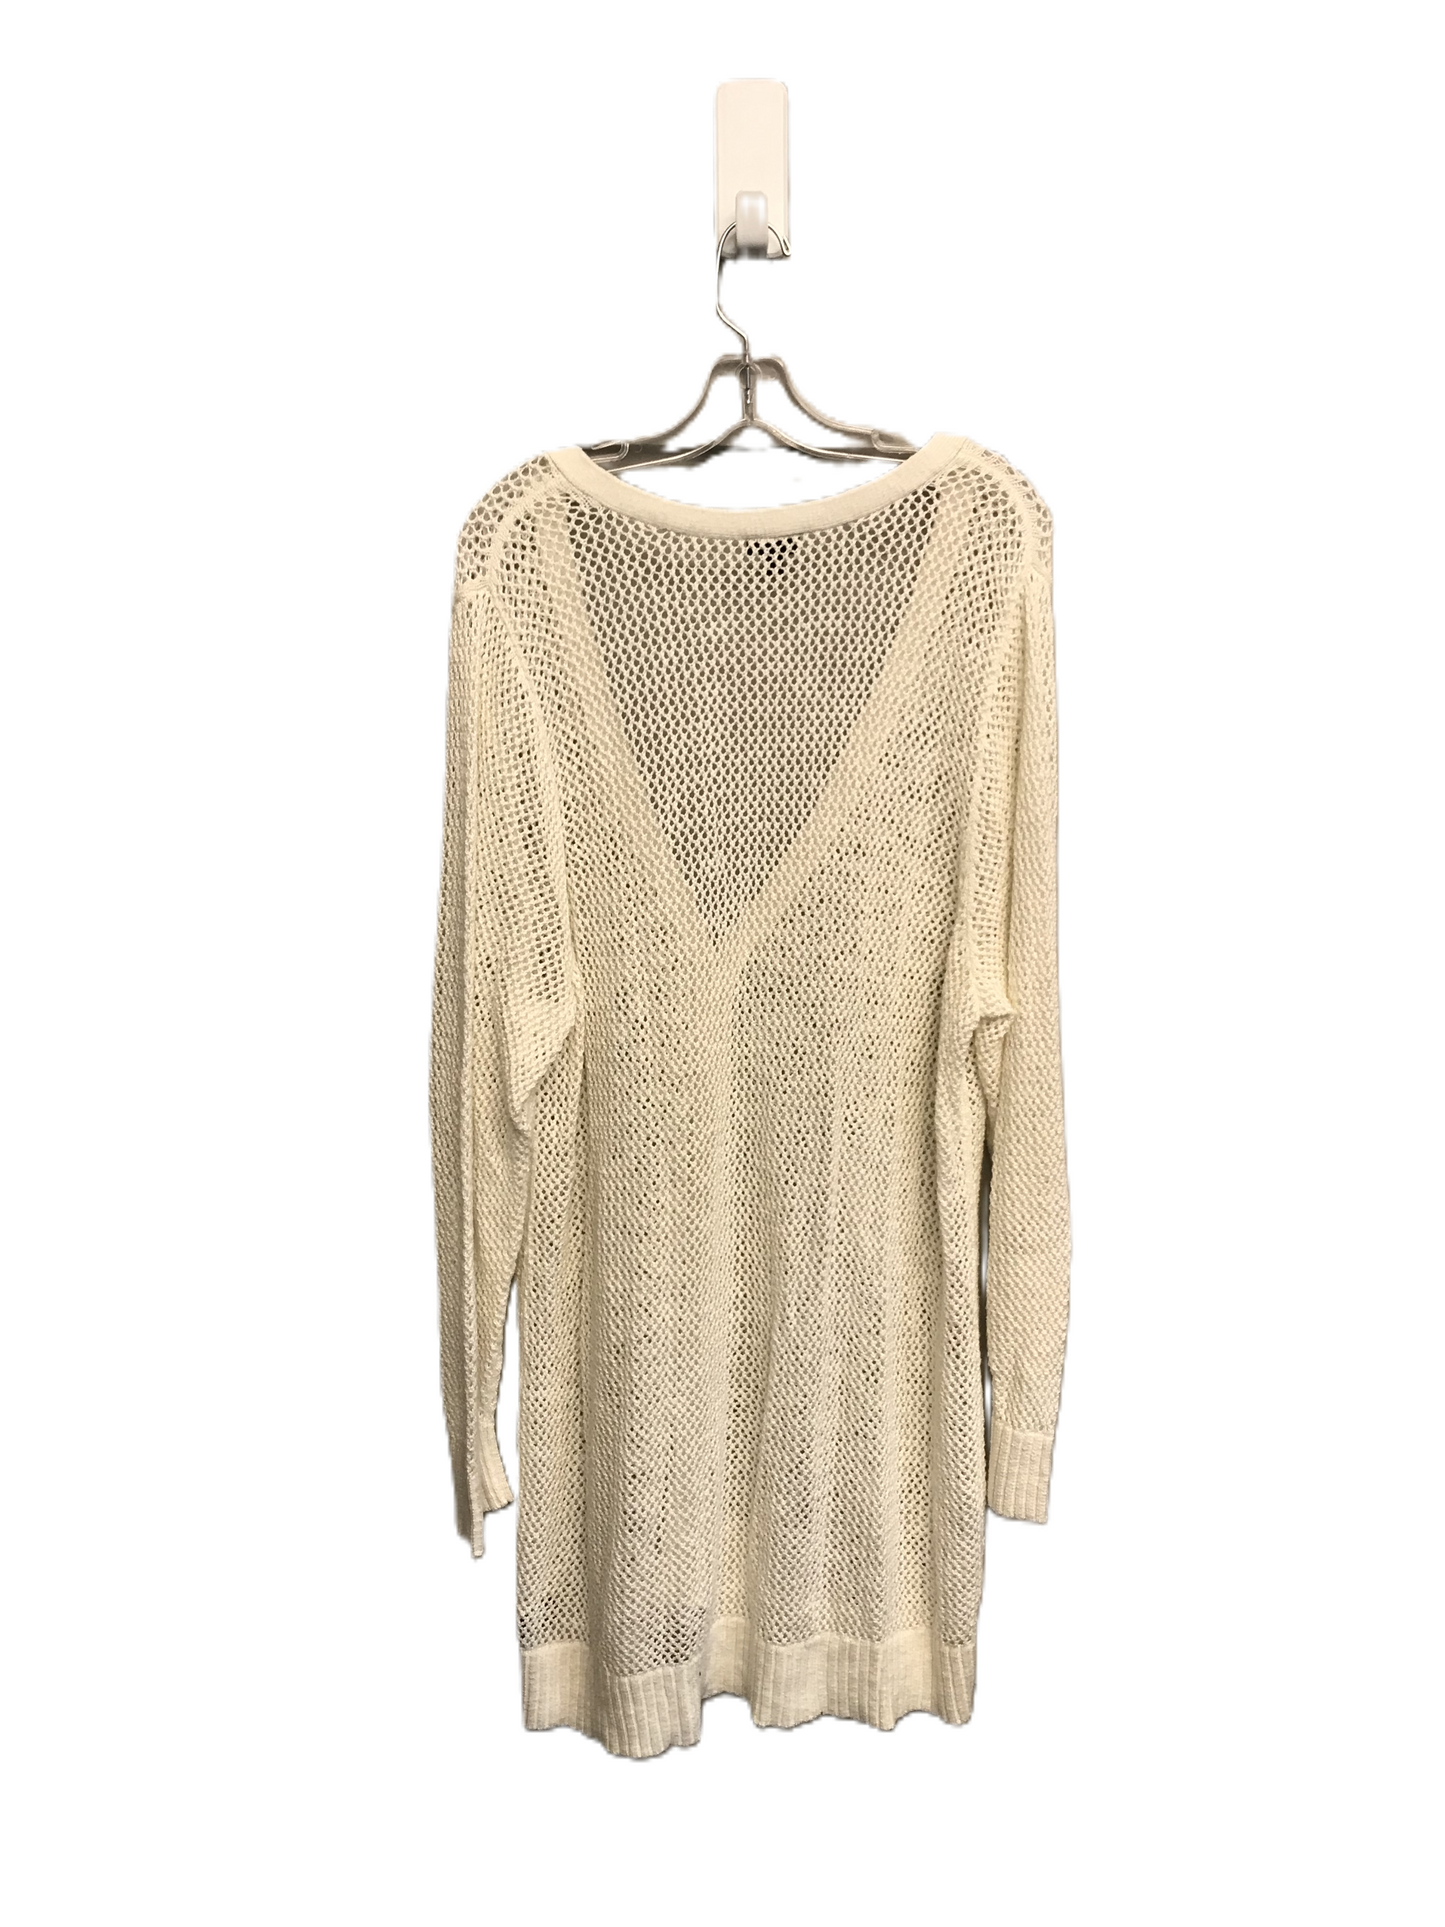 White Sweater Cardigan By Torrid, Size: 4x